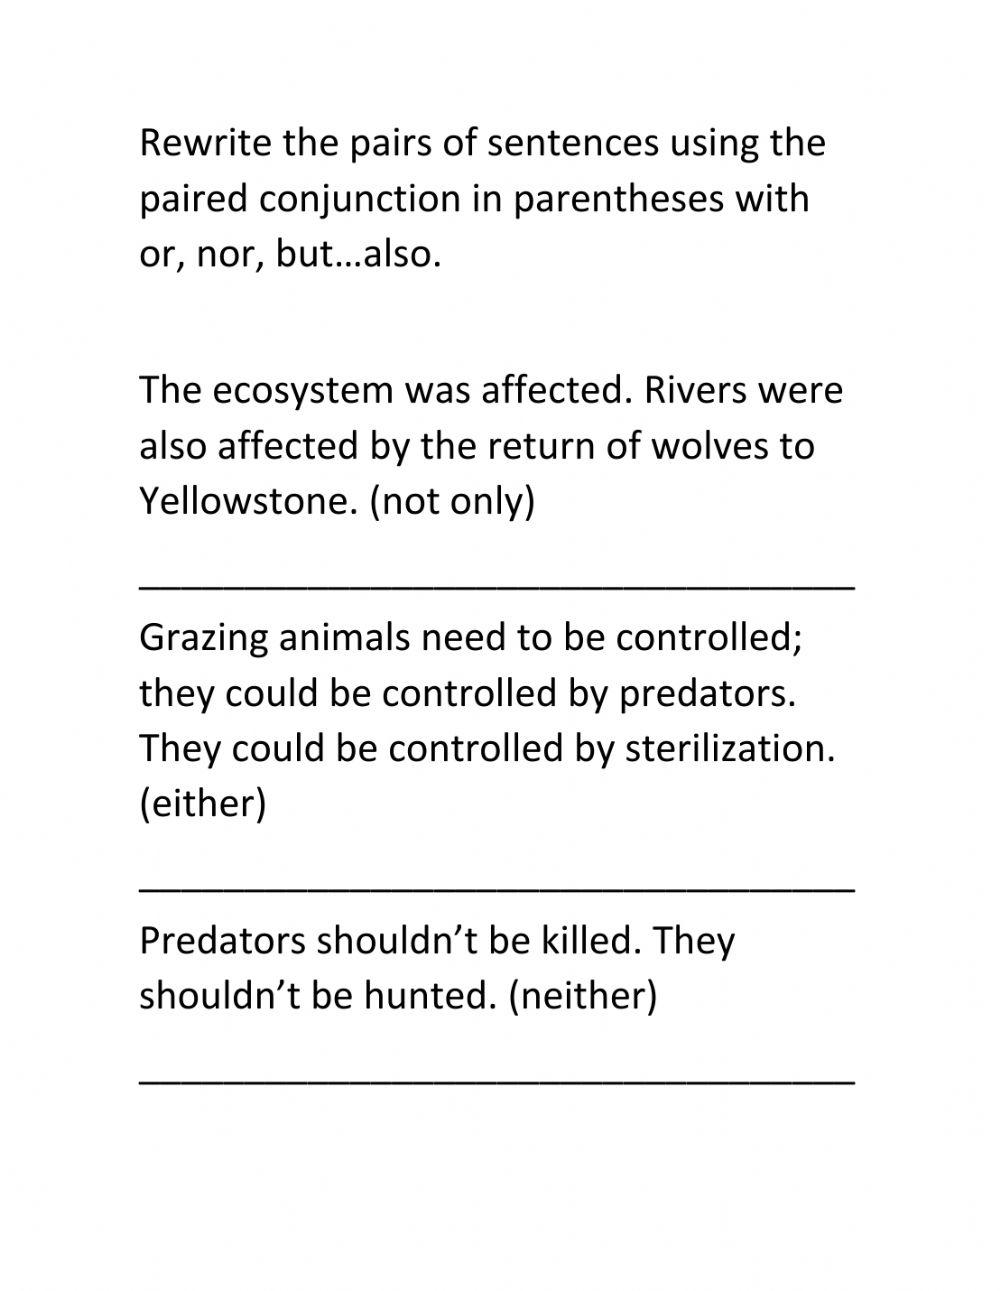 How wolves change rivers